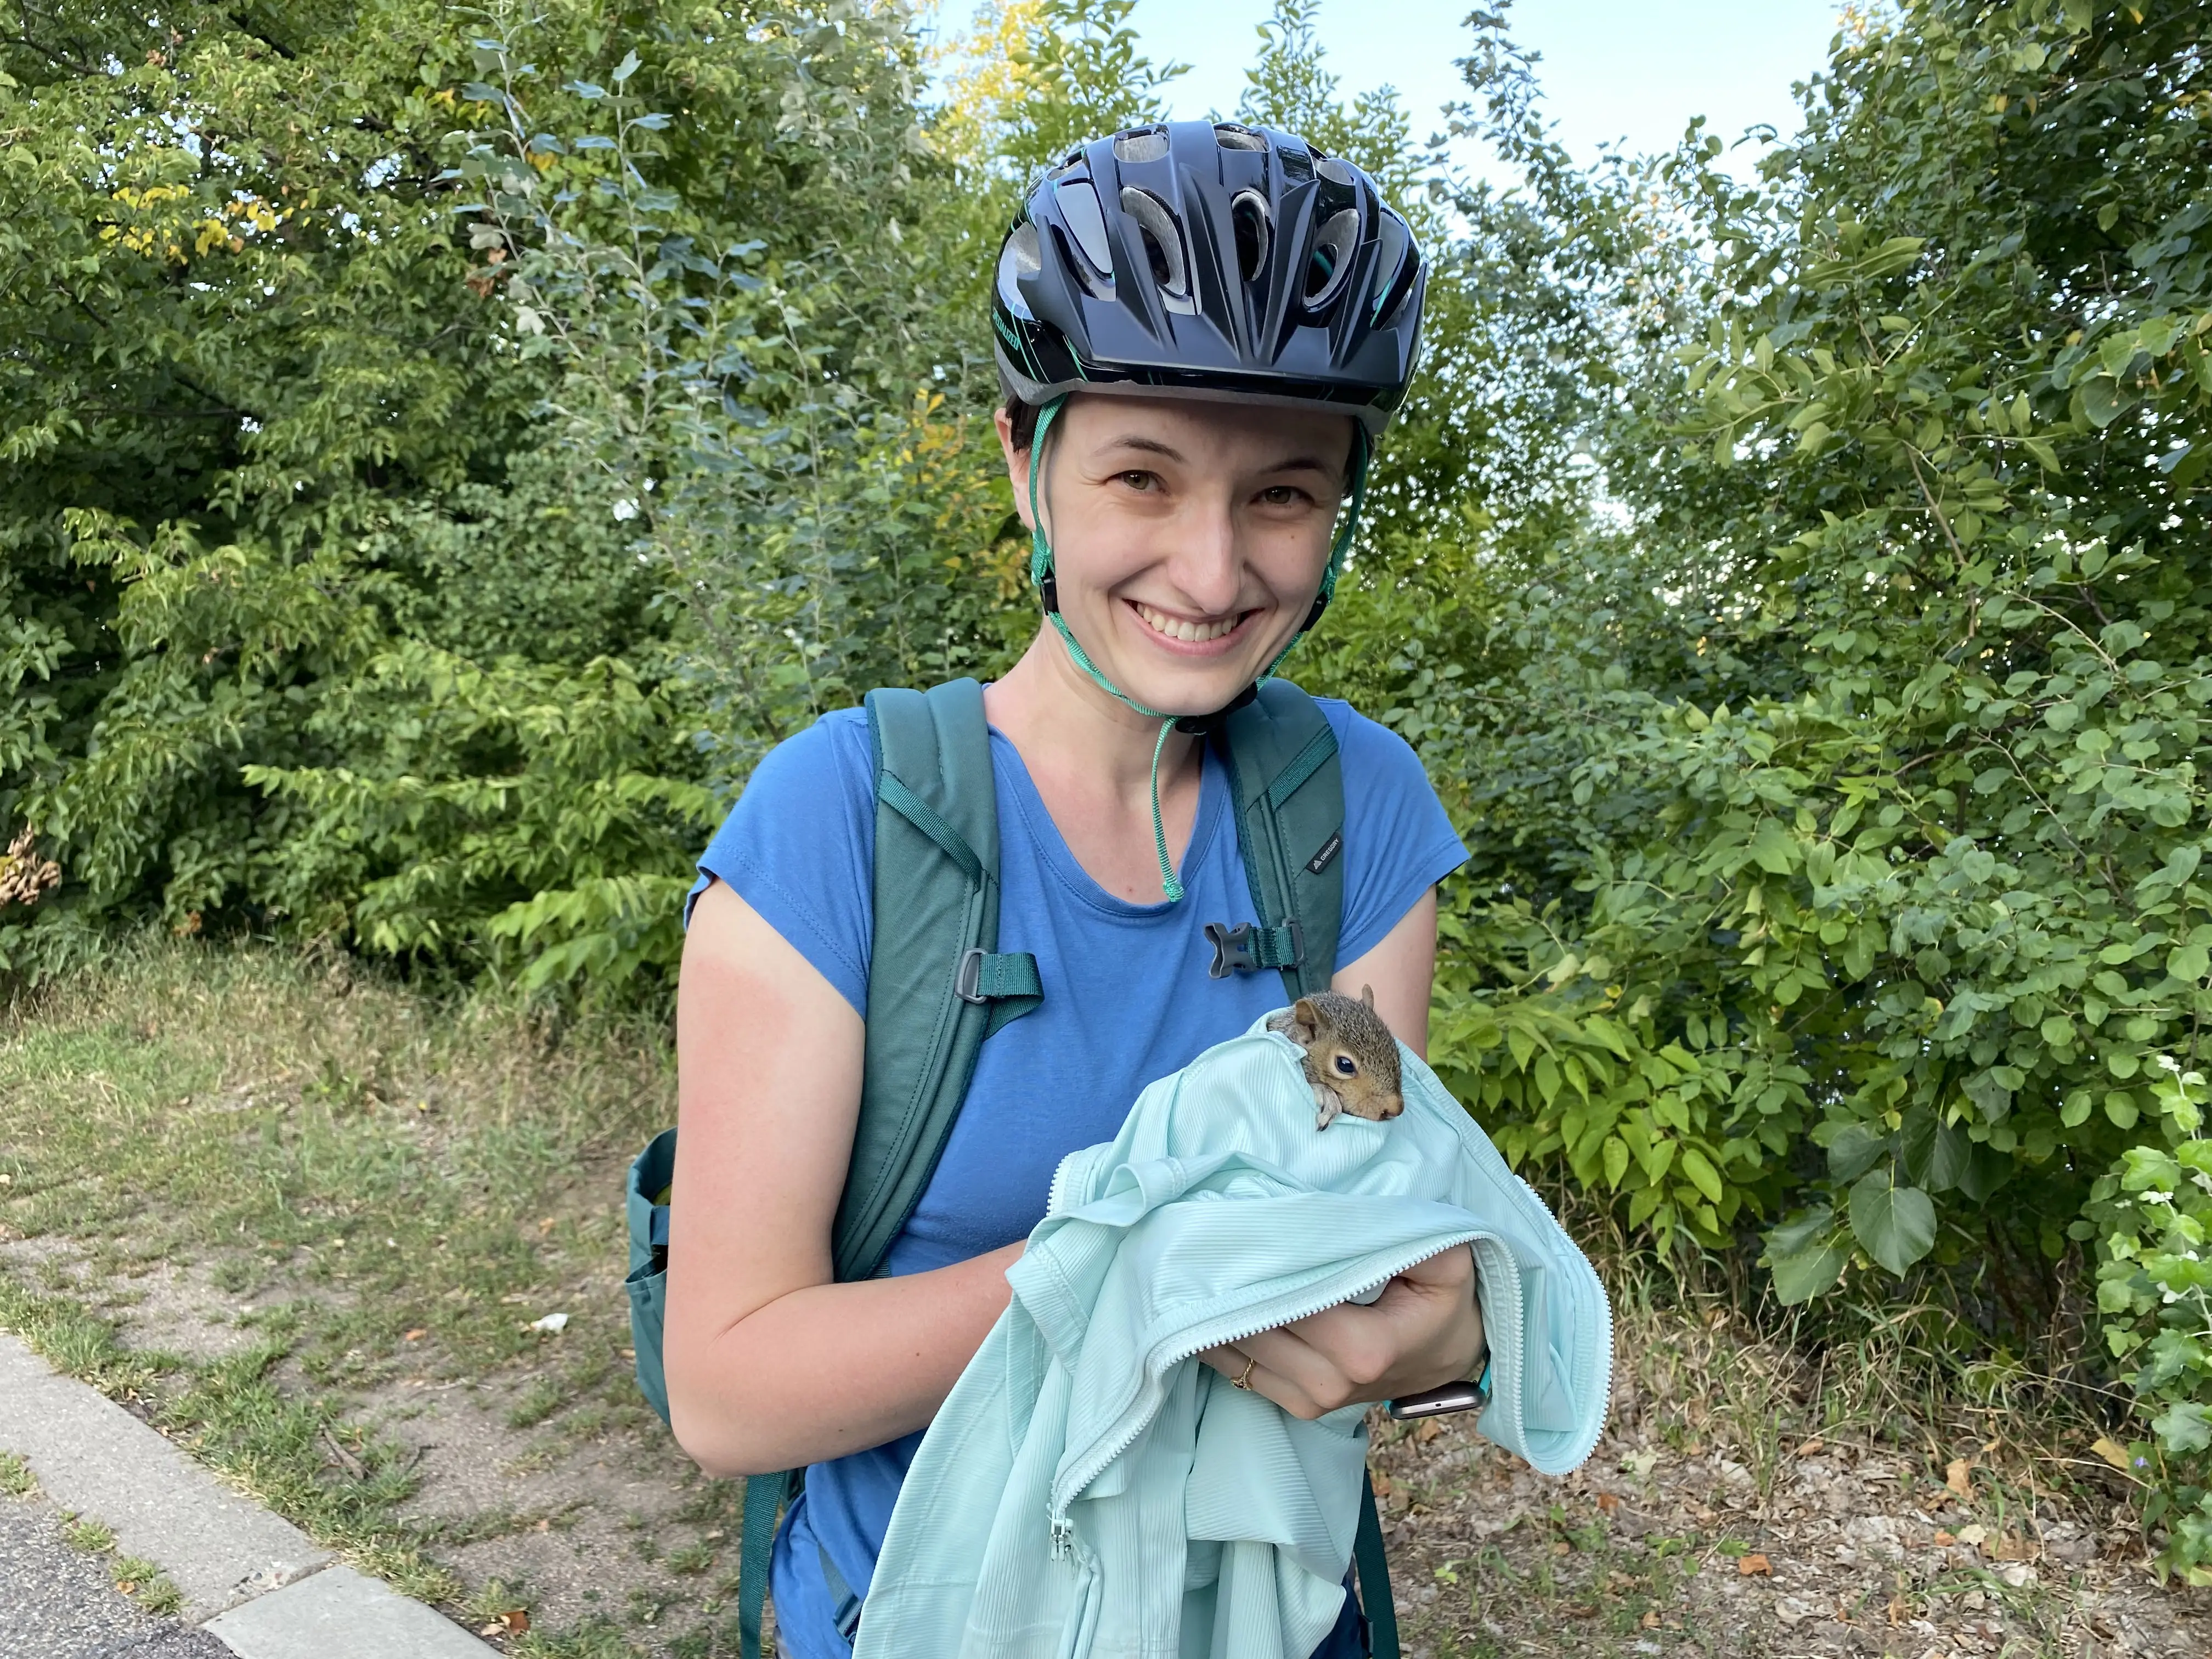 I saved a baby squirrel that was on the bike path!